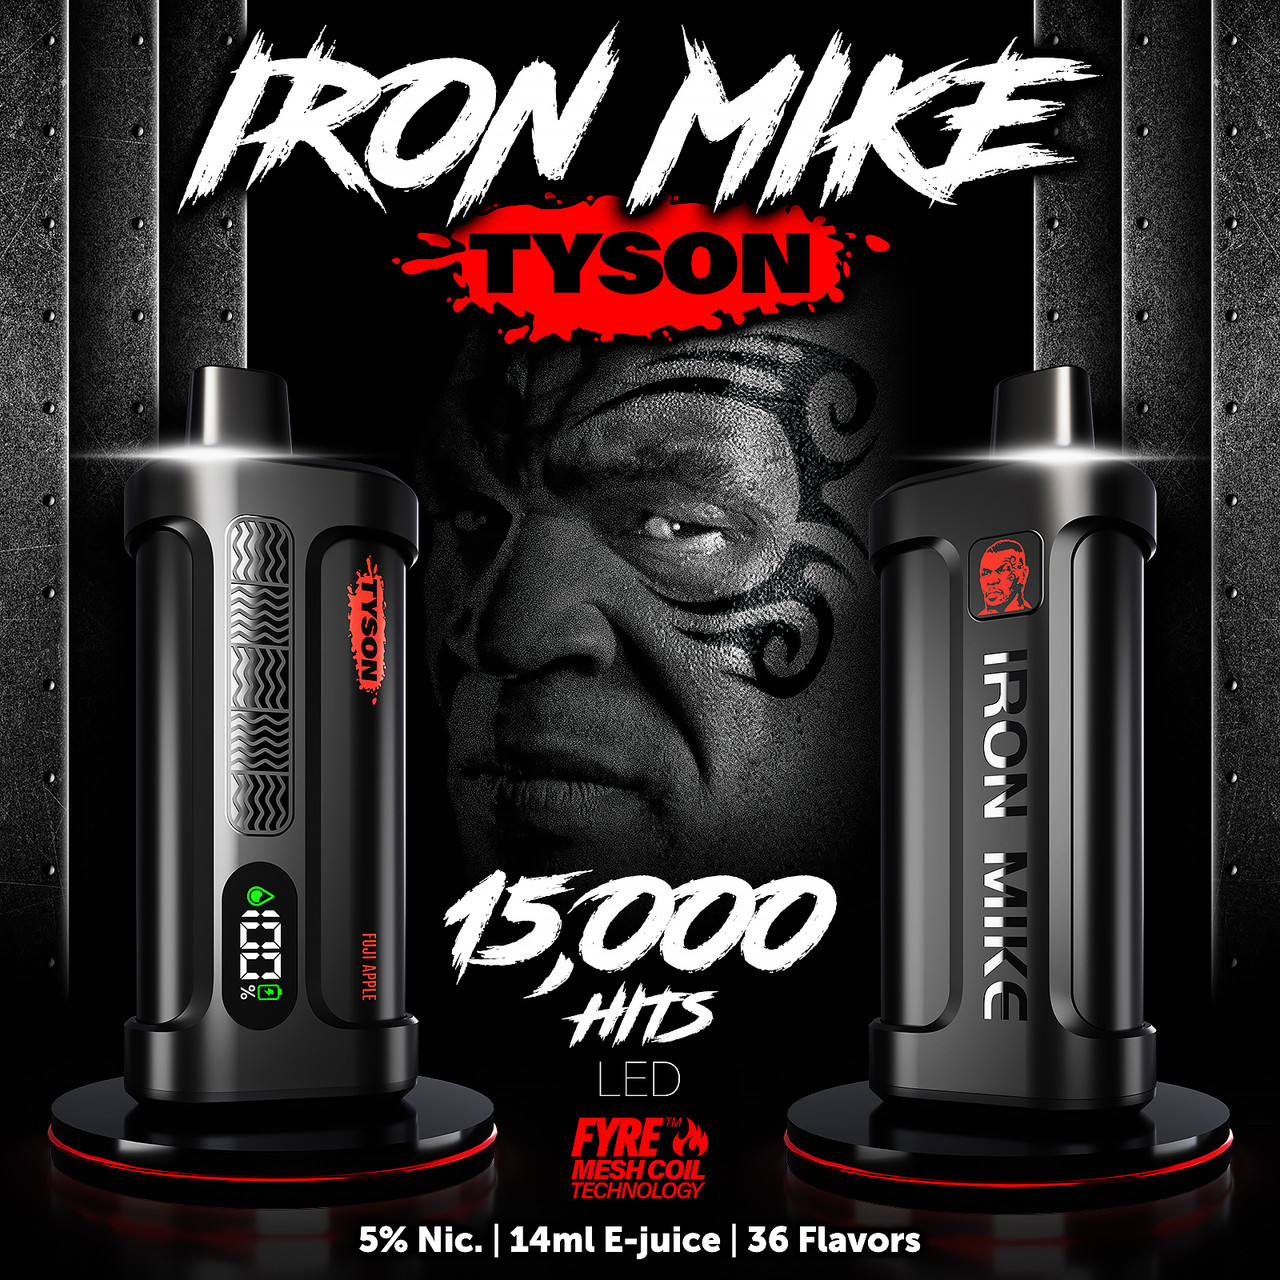 Cool Mint- Iron Mike Tyson 15000 Puffs | All Flavors Available